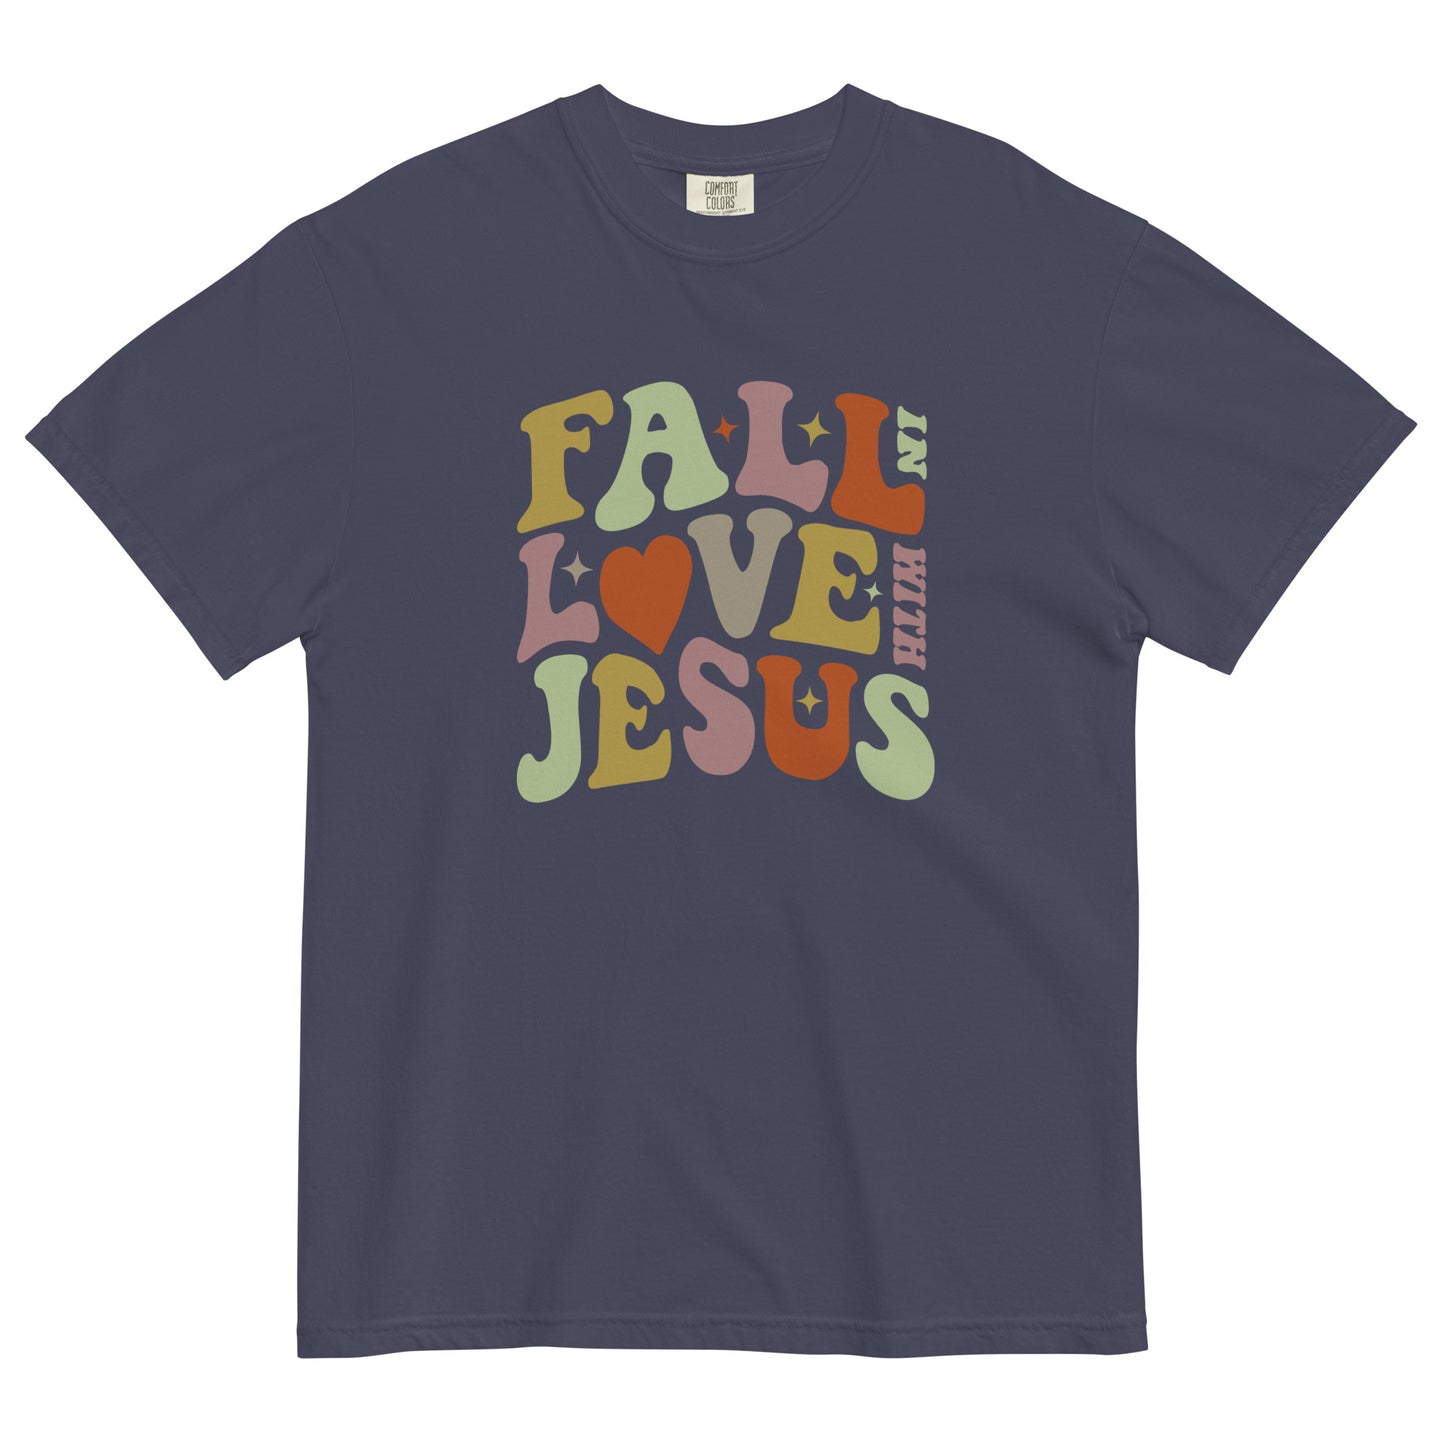 "Fall in Love with Jesus" Unisex garment-dyed heavyweight t-shirt